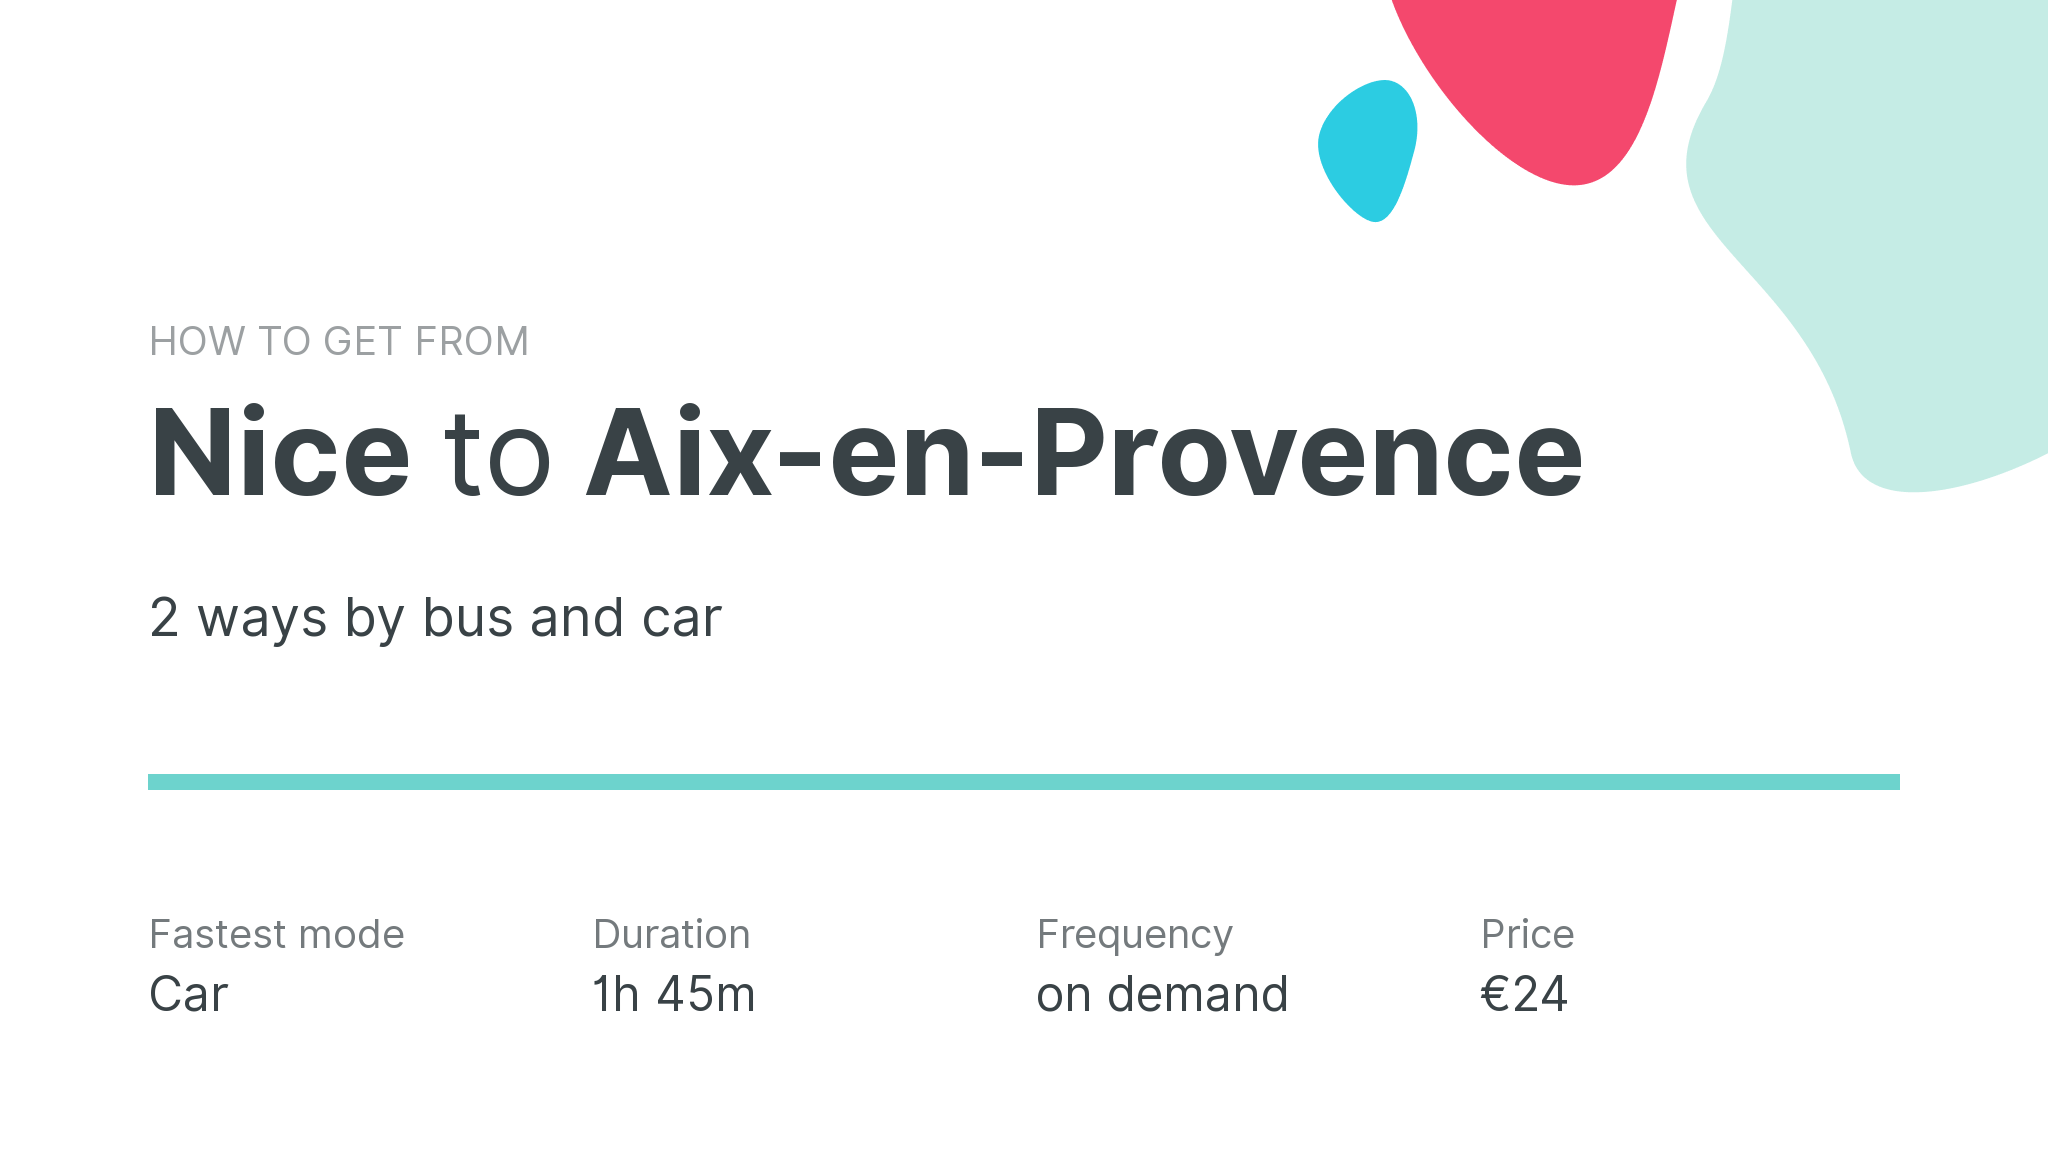 How do I get from Nice to Aix-en-Provence